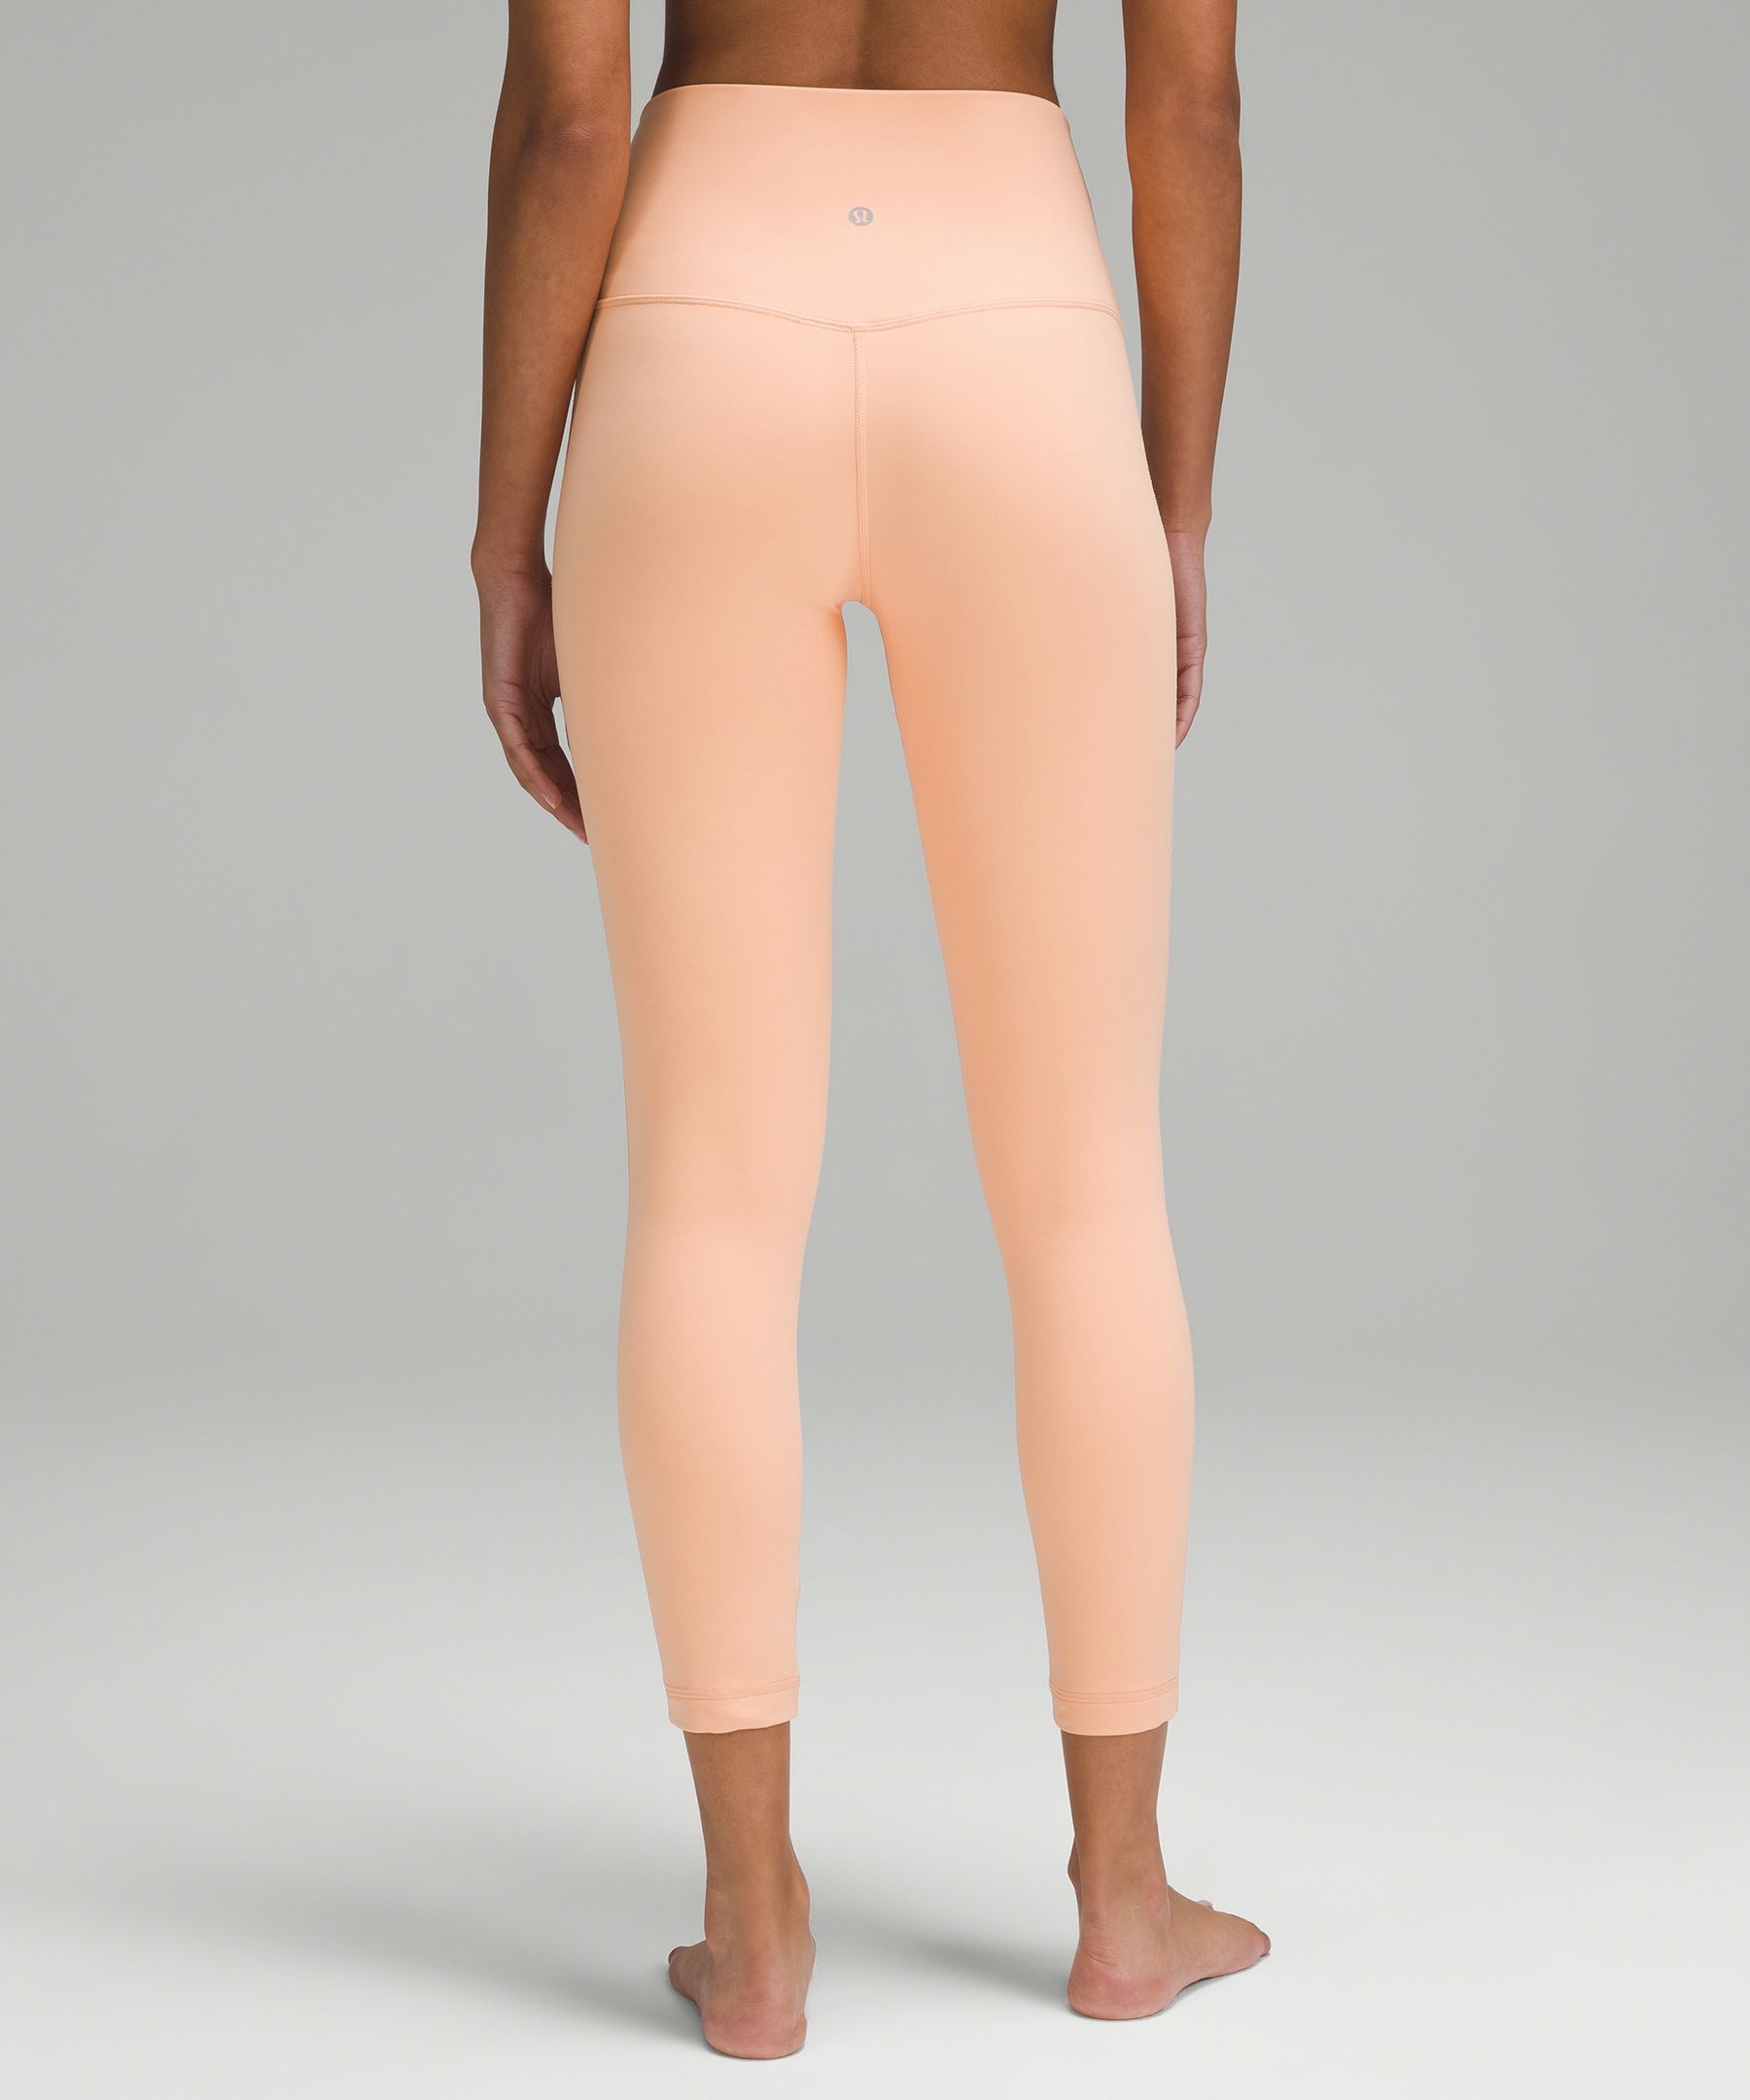 Shop the Align Pant II 25, Women's Yoga Pants. Designed to minimize  distractions and maximize com…